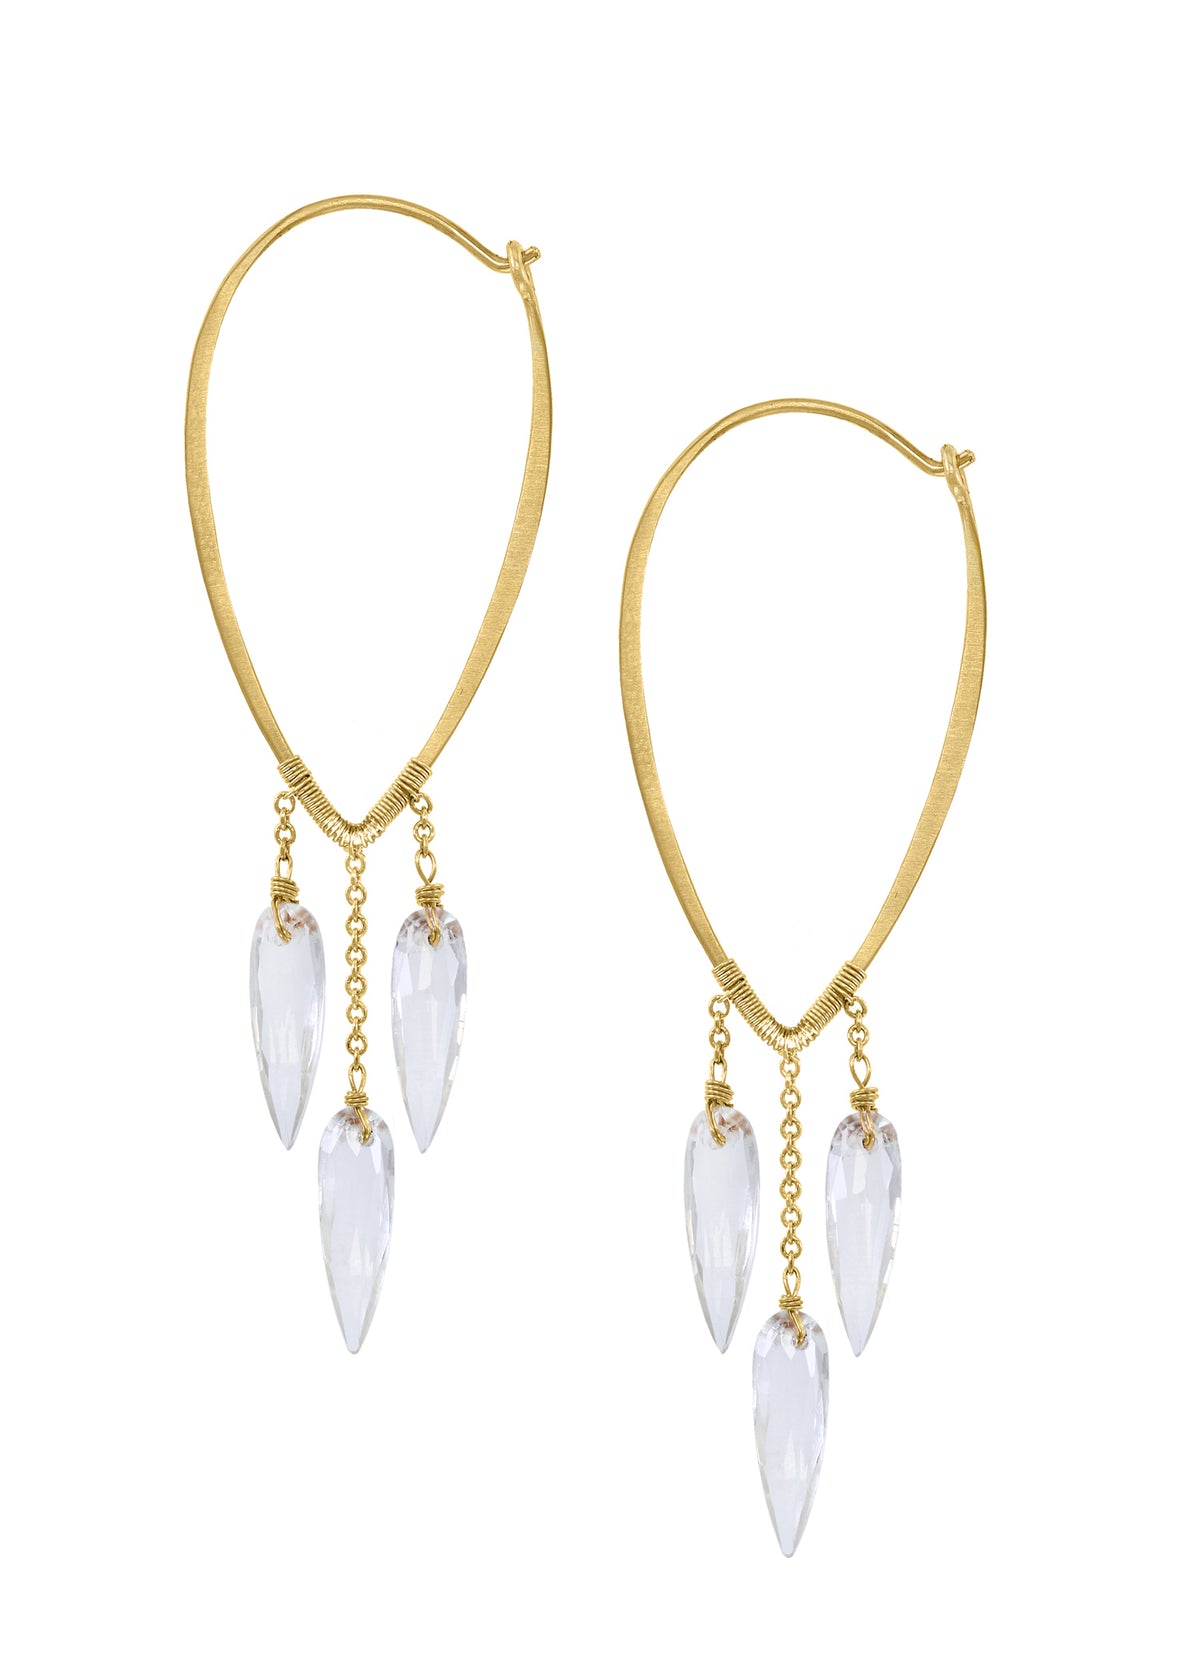 White topaz 14k gold Earrings measure 2-7/16&quot; in length and 3/4&quot; in width across the widest point of the hoop Handmade in our Los Angeles studio